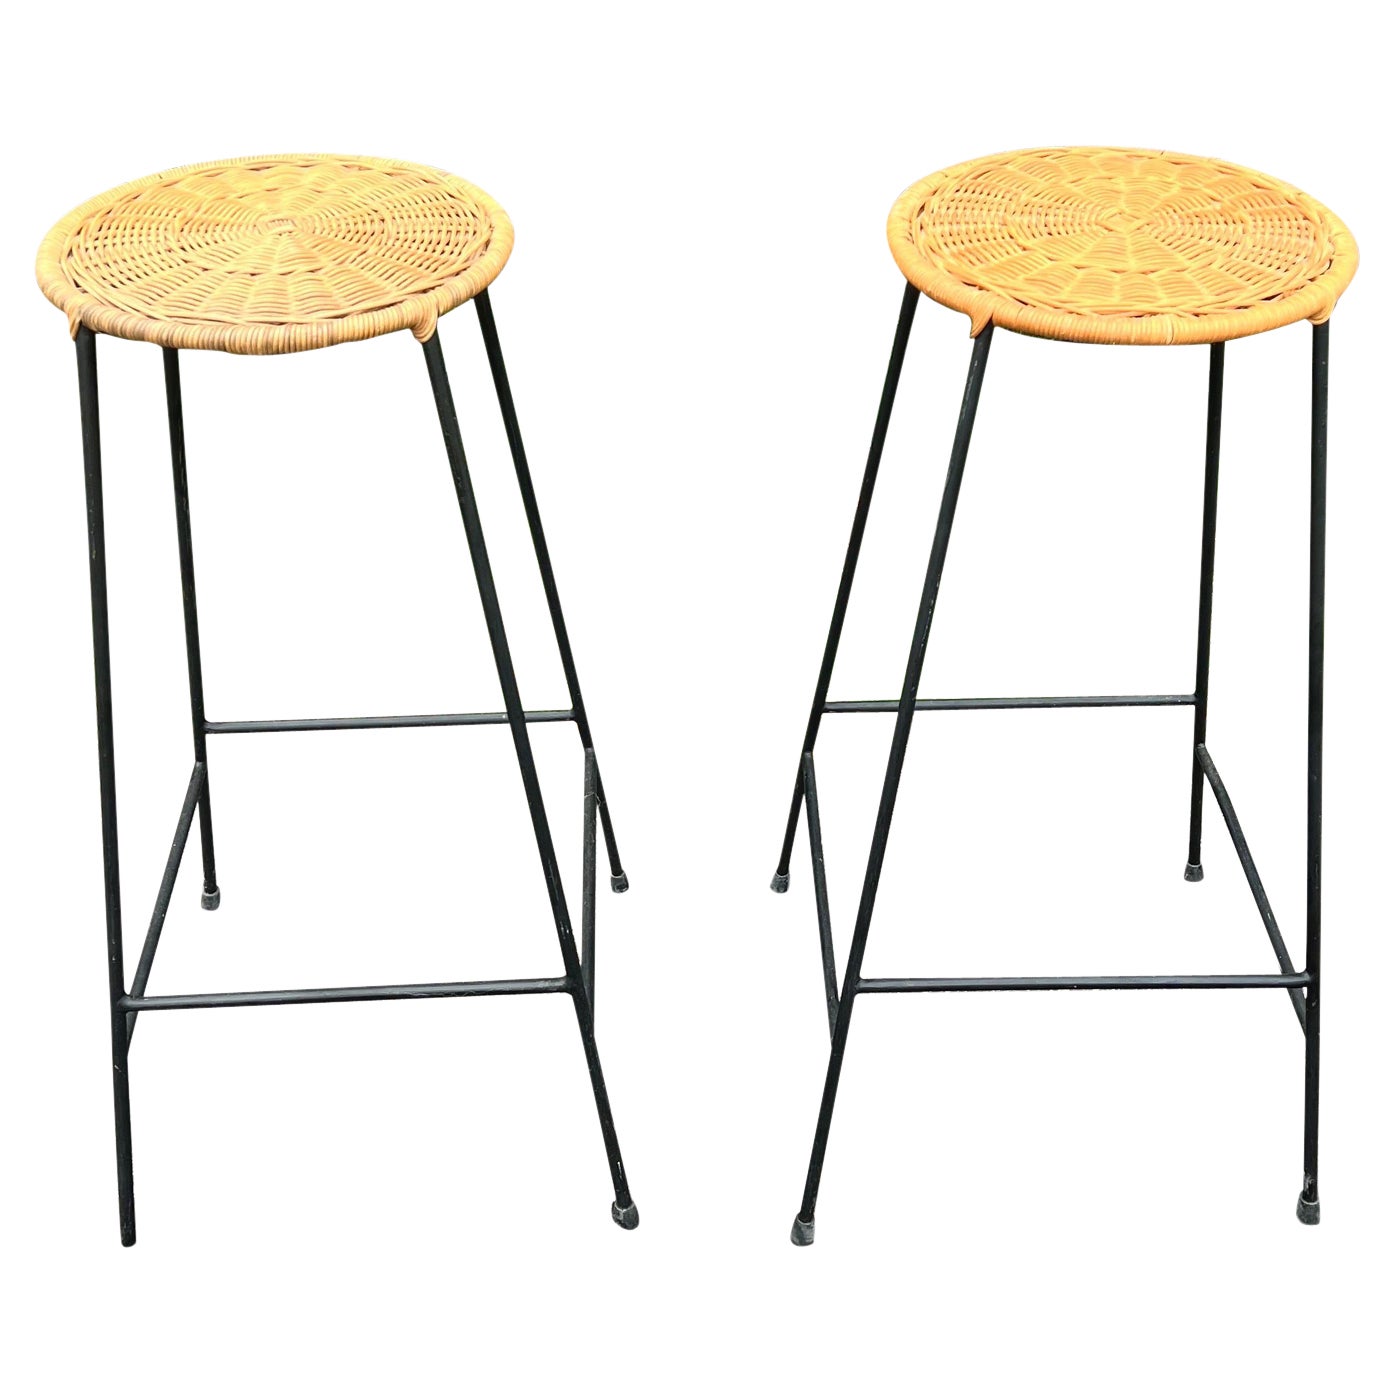 A pair of 1950’s Danny Ho Fong Style Counter Height Bar Stools in iron and wicke